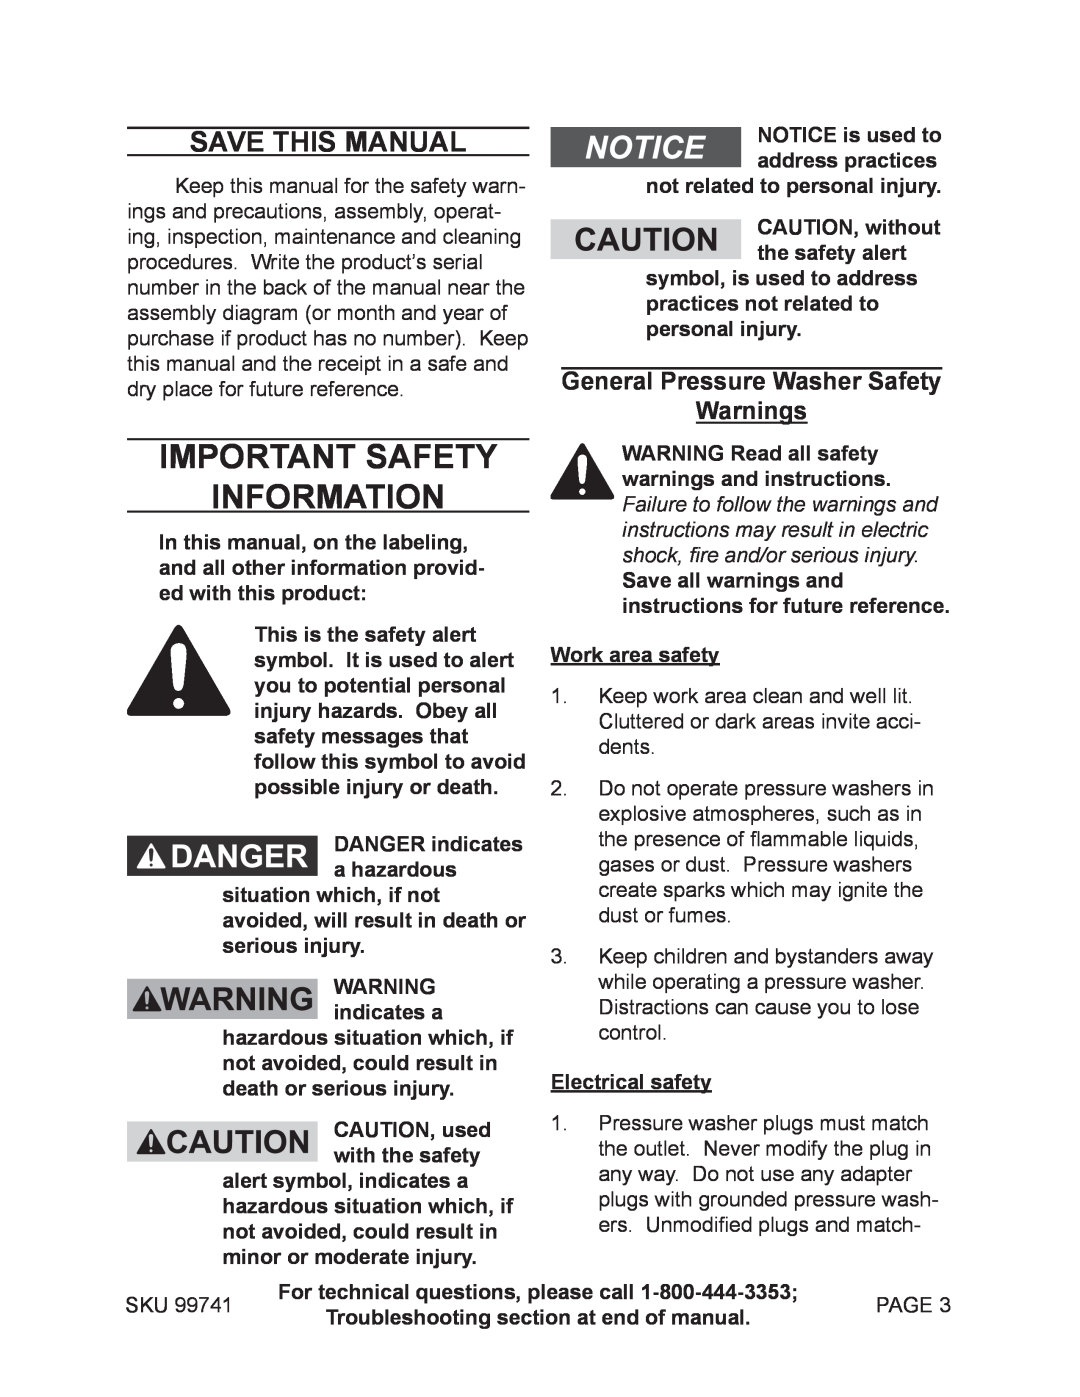 Harbor Freight Tools 99741 manual Important SAFETY Information, Save This Manual, General Pressure Washer Safety Warnings 